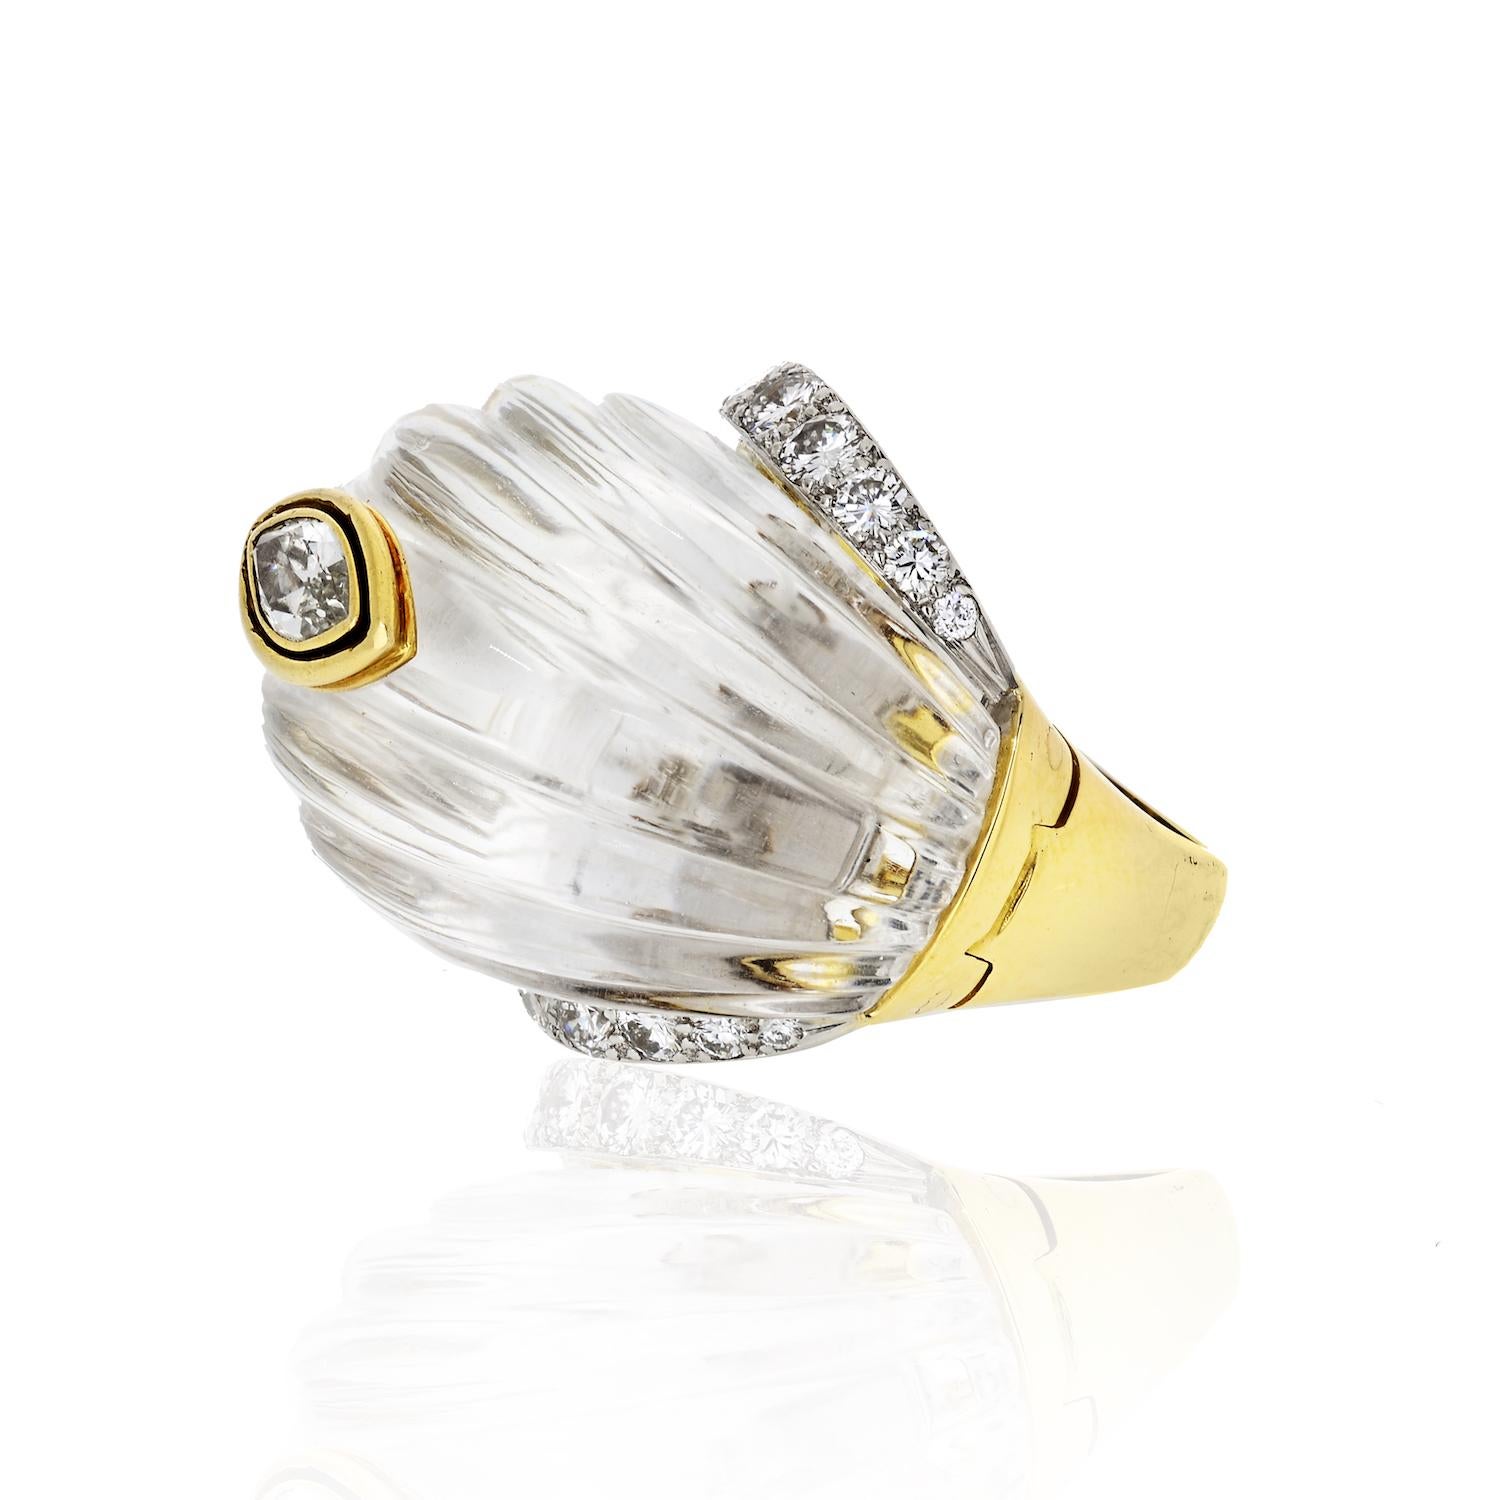 Long thought to have protective and healing powers, rock crystal might be the stone to wear now.
18K yellow gold and platinum David Webb Rock Crystal carved quartz cocktail ring featuring 1.00 carats of round brilliant diamonds at shoulders and a